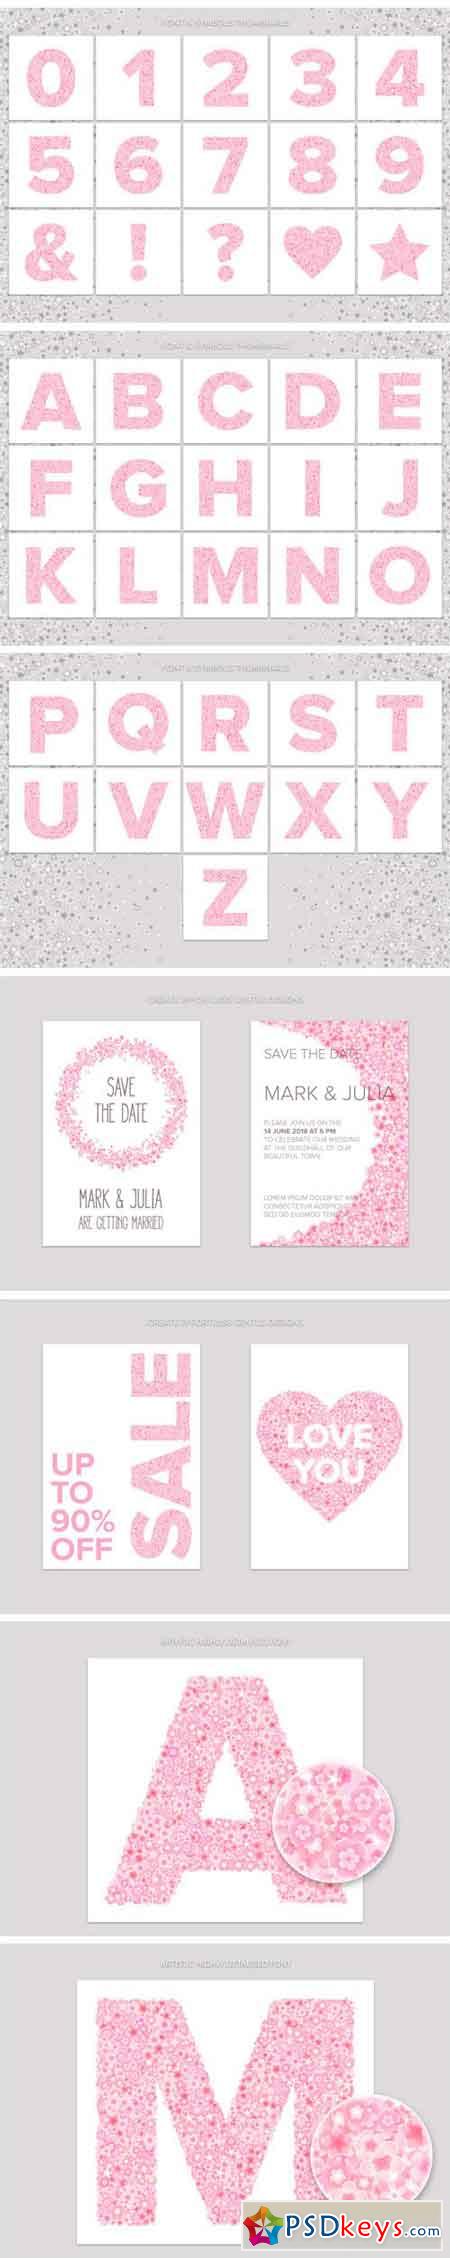 Cherry Blossom Font & Backgrounds